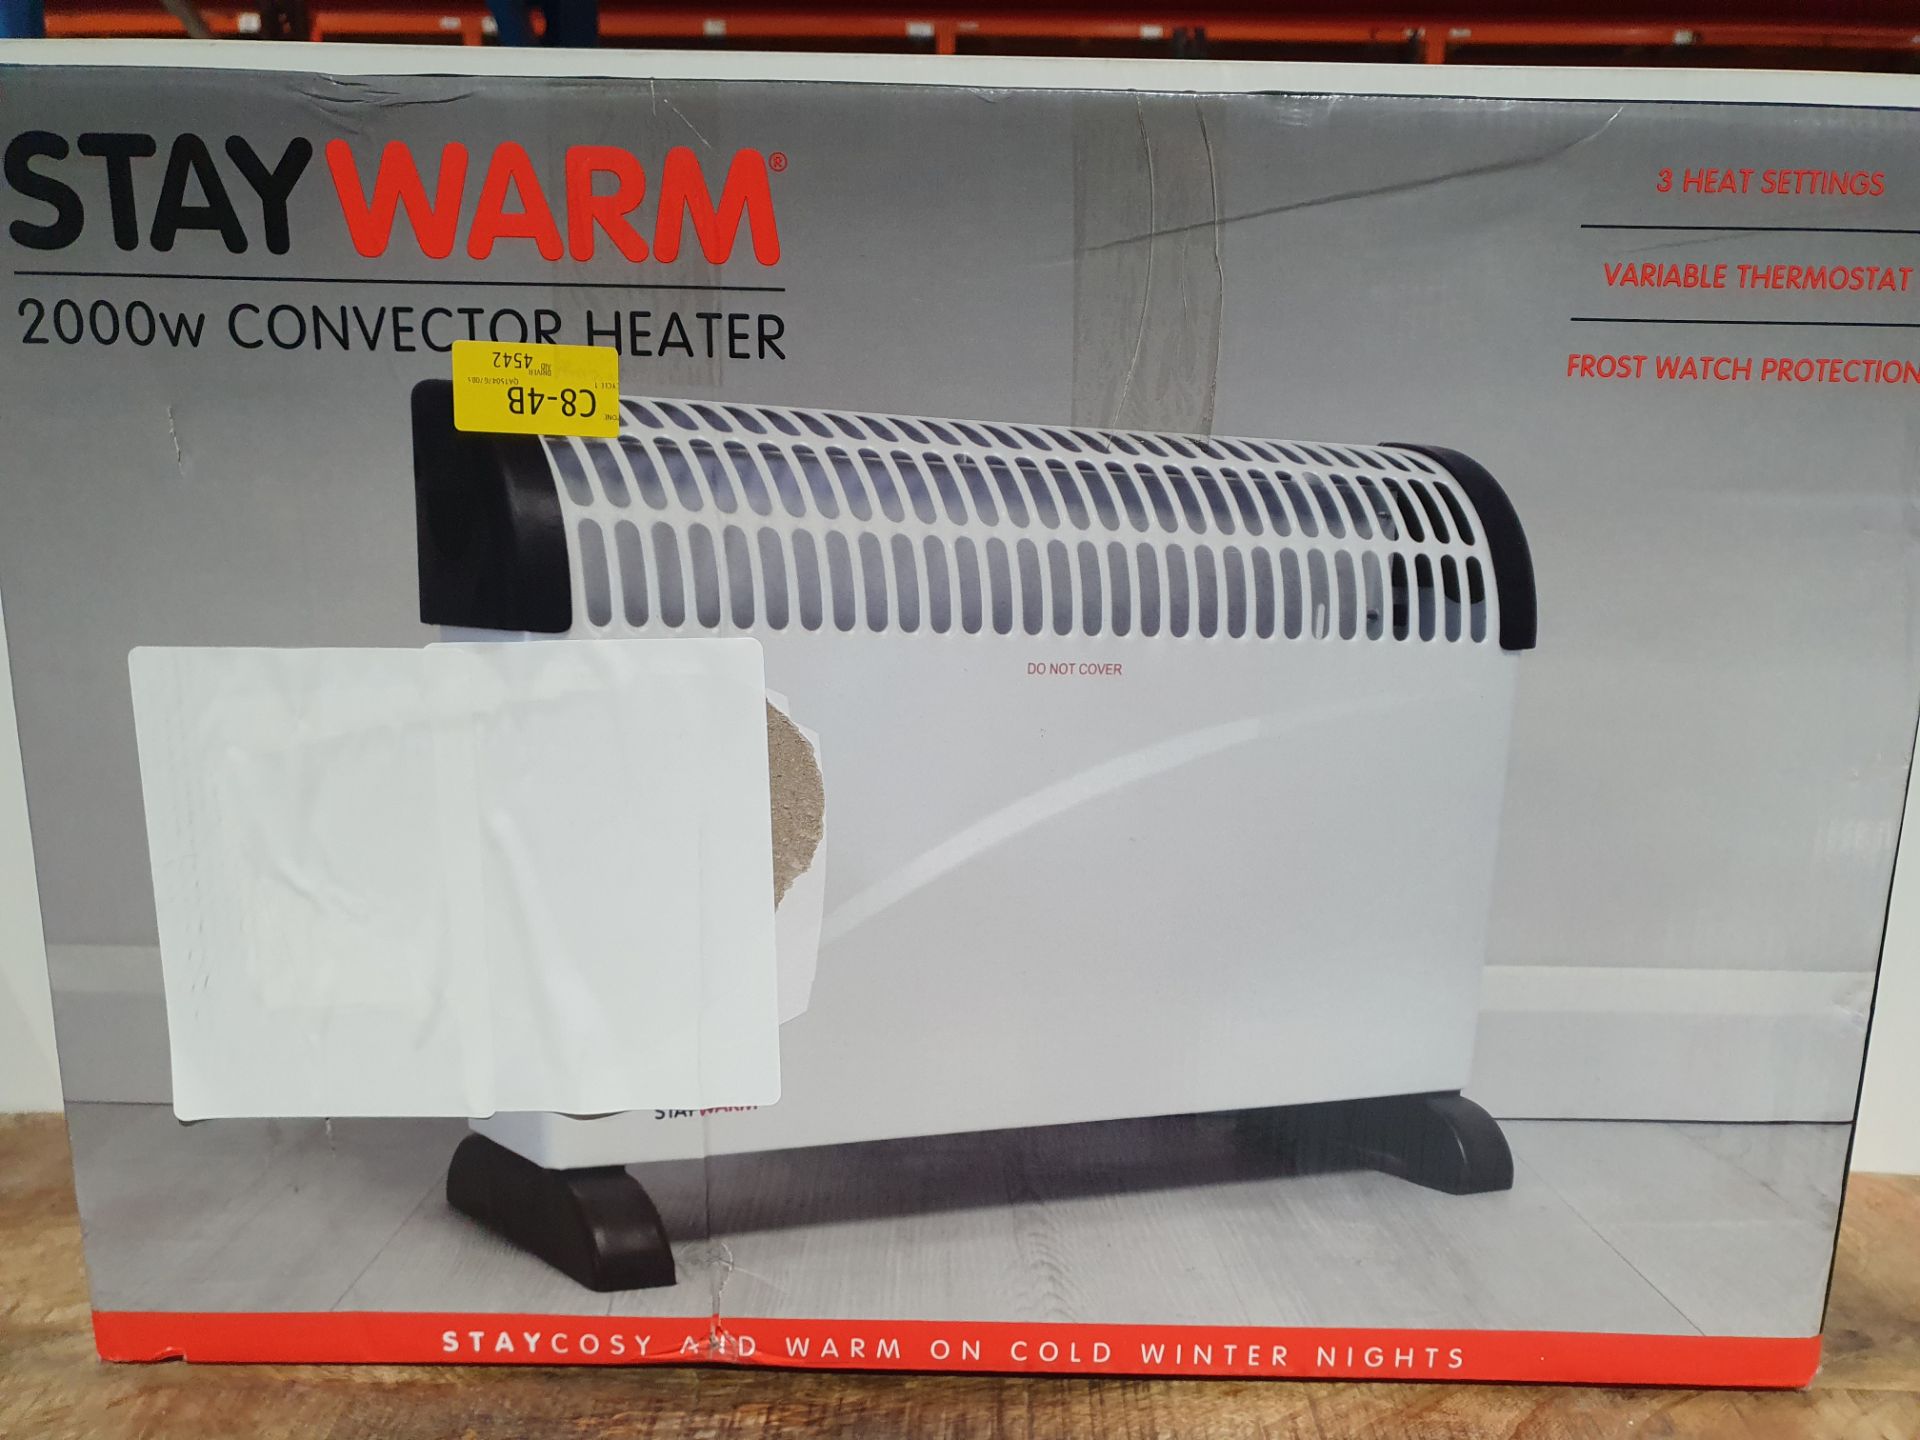 RRP £41.00 STAYWARM 2000w Convector Heater with 3 Heat Settings/Variable